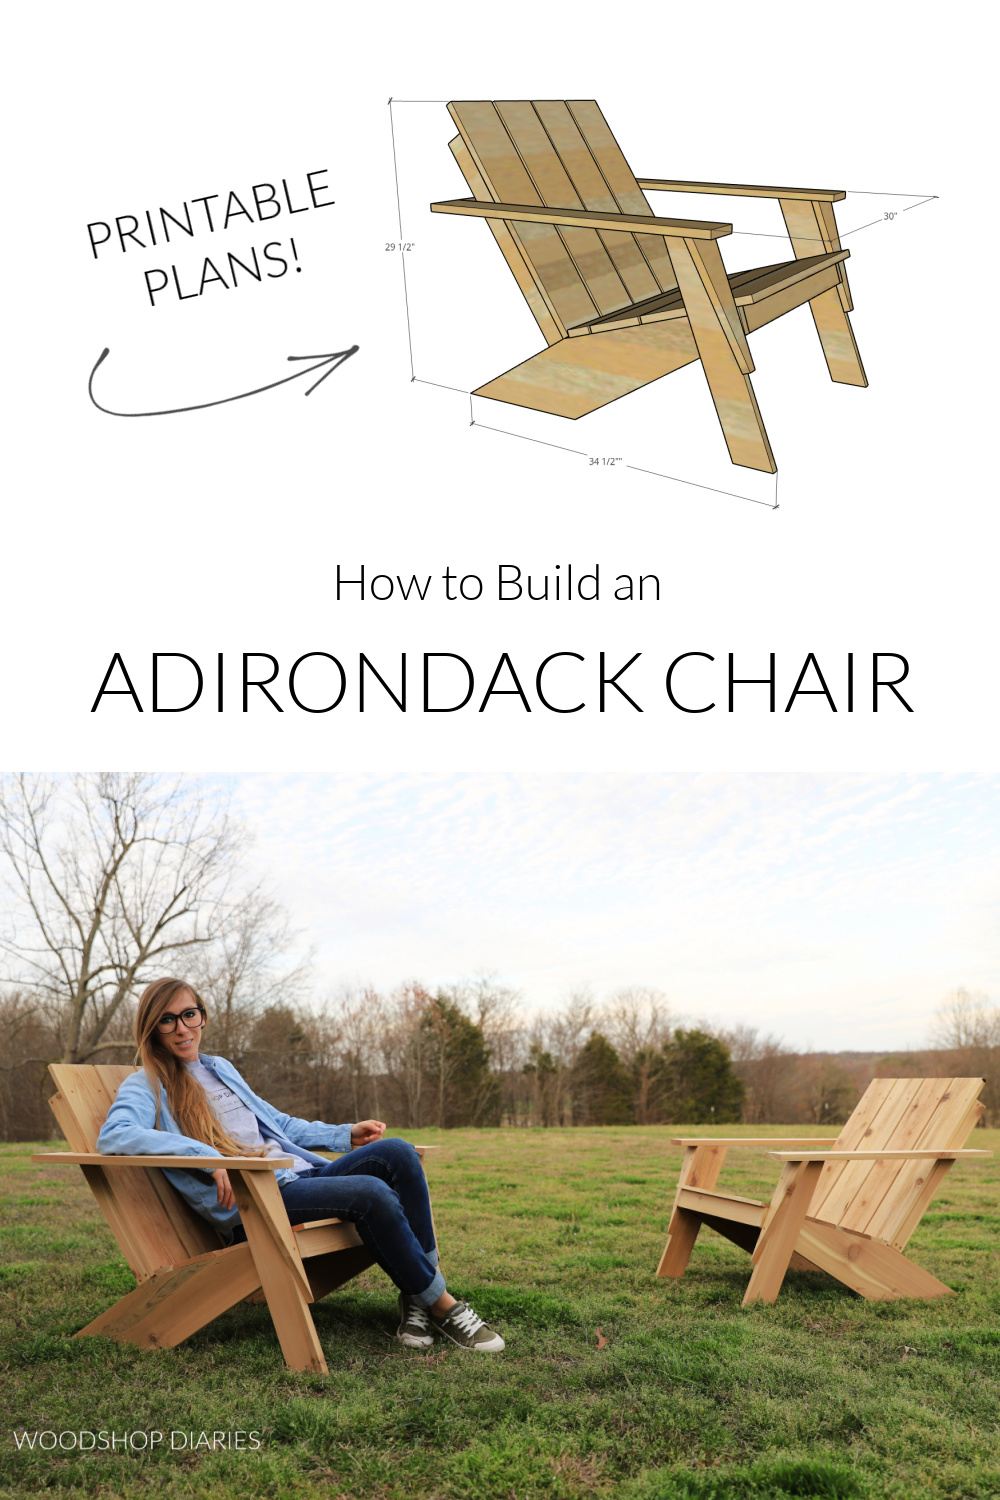 Pinterest collage image showing overall dimensional diagram at top and Shara Woodshop Diaries sitting in Adirondack chair at bottom with text "how to build an ADIRONDACK CHAIR"